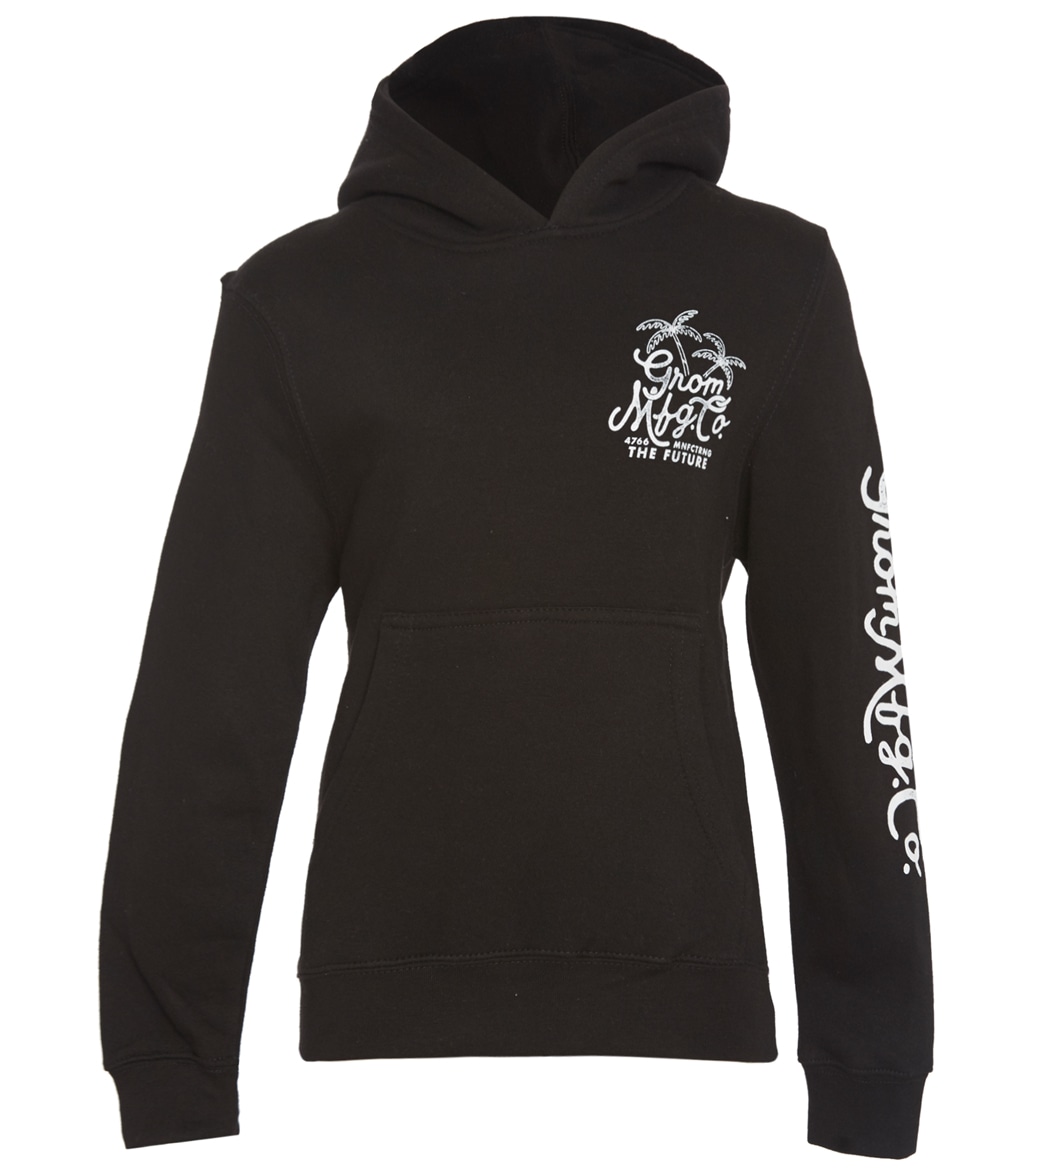 Grom Boys' Roadster Pullover Hoodie - Black Large Cotton/Polyester - Swimoutlet.com